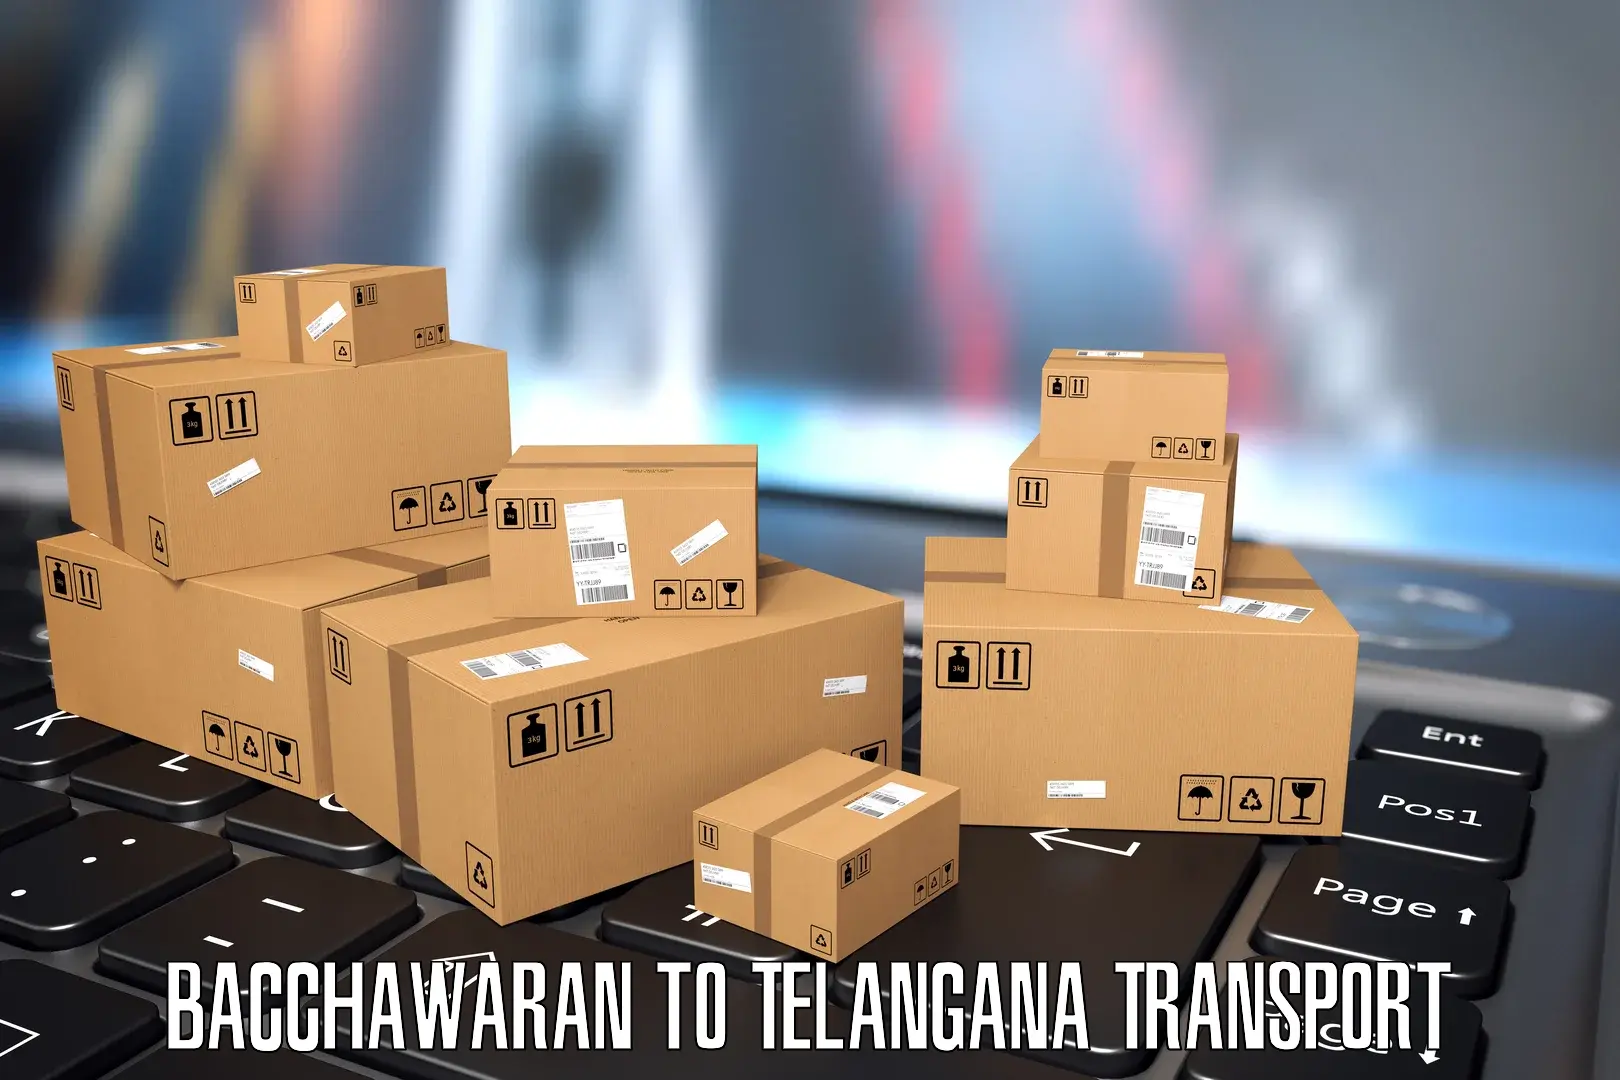 Express transport services in Bacchawaran to Rangareddy